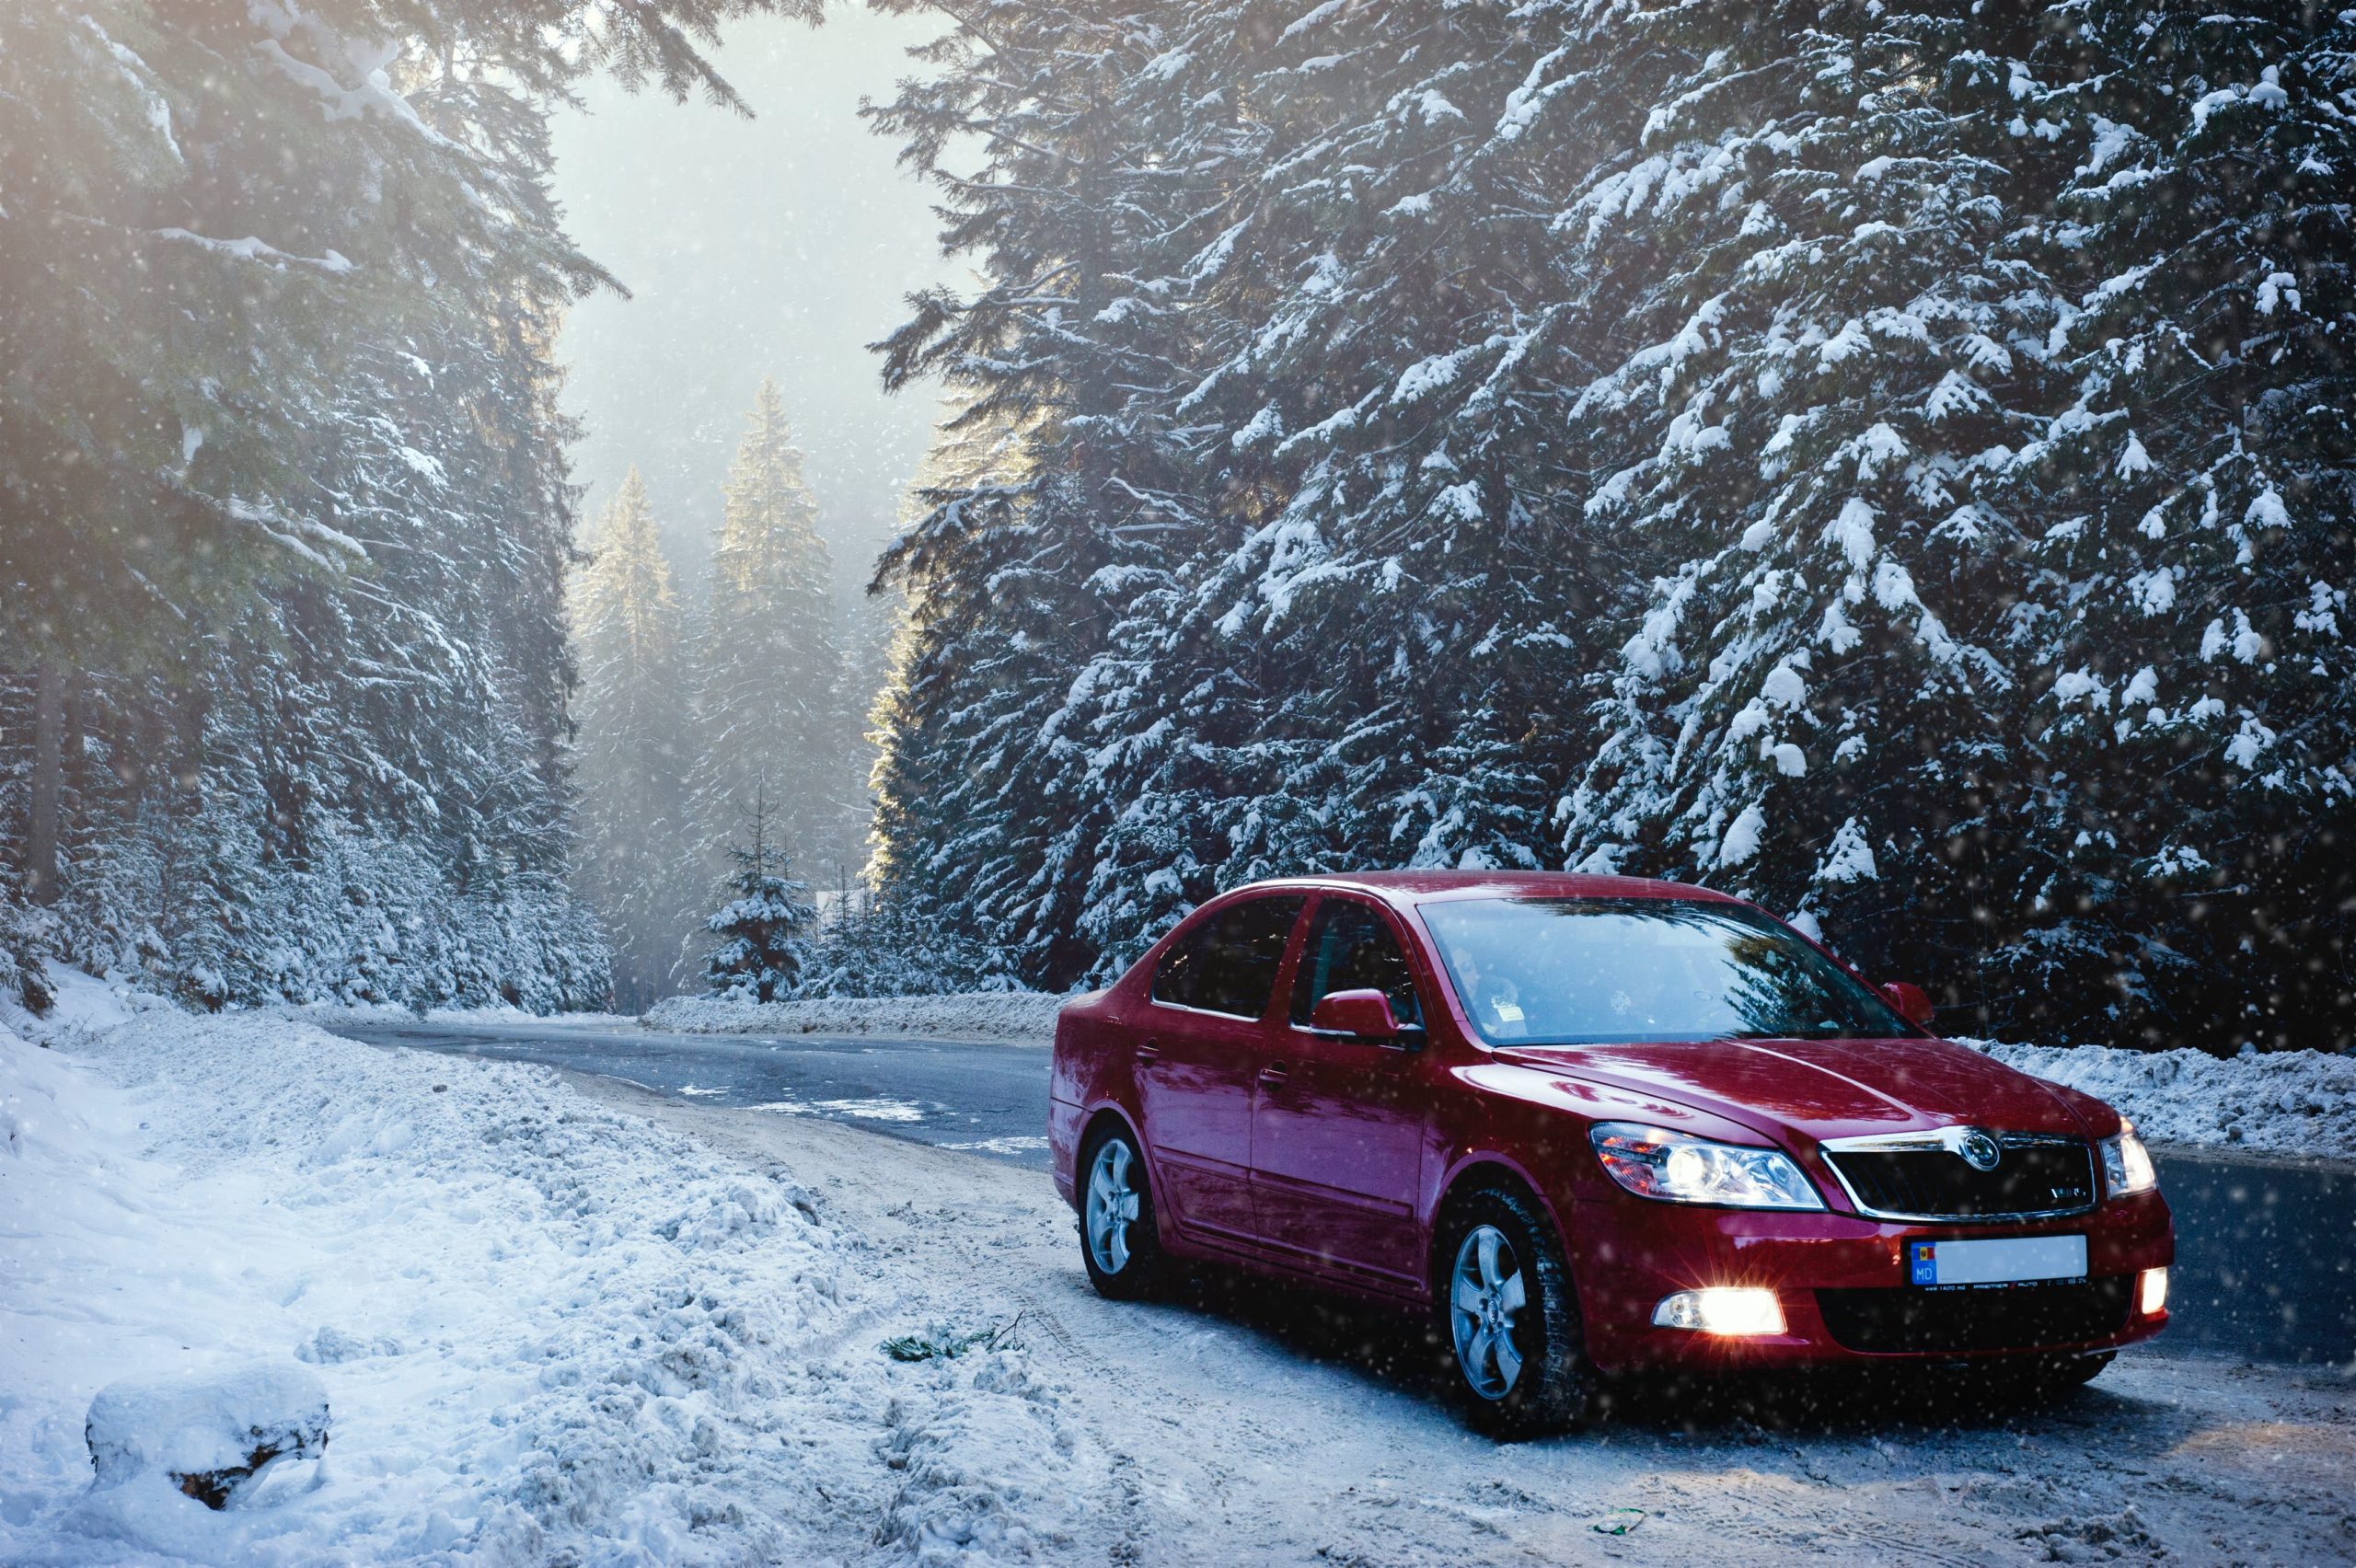 Driving Tips for The Winter Months